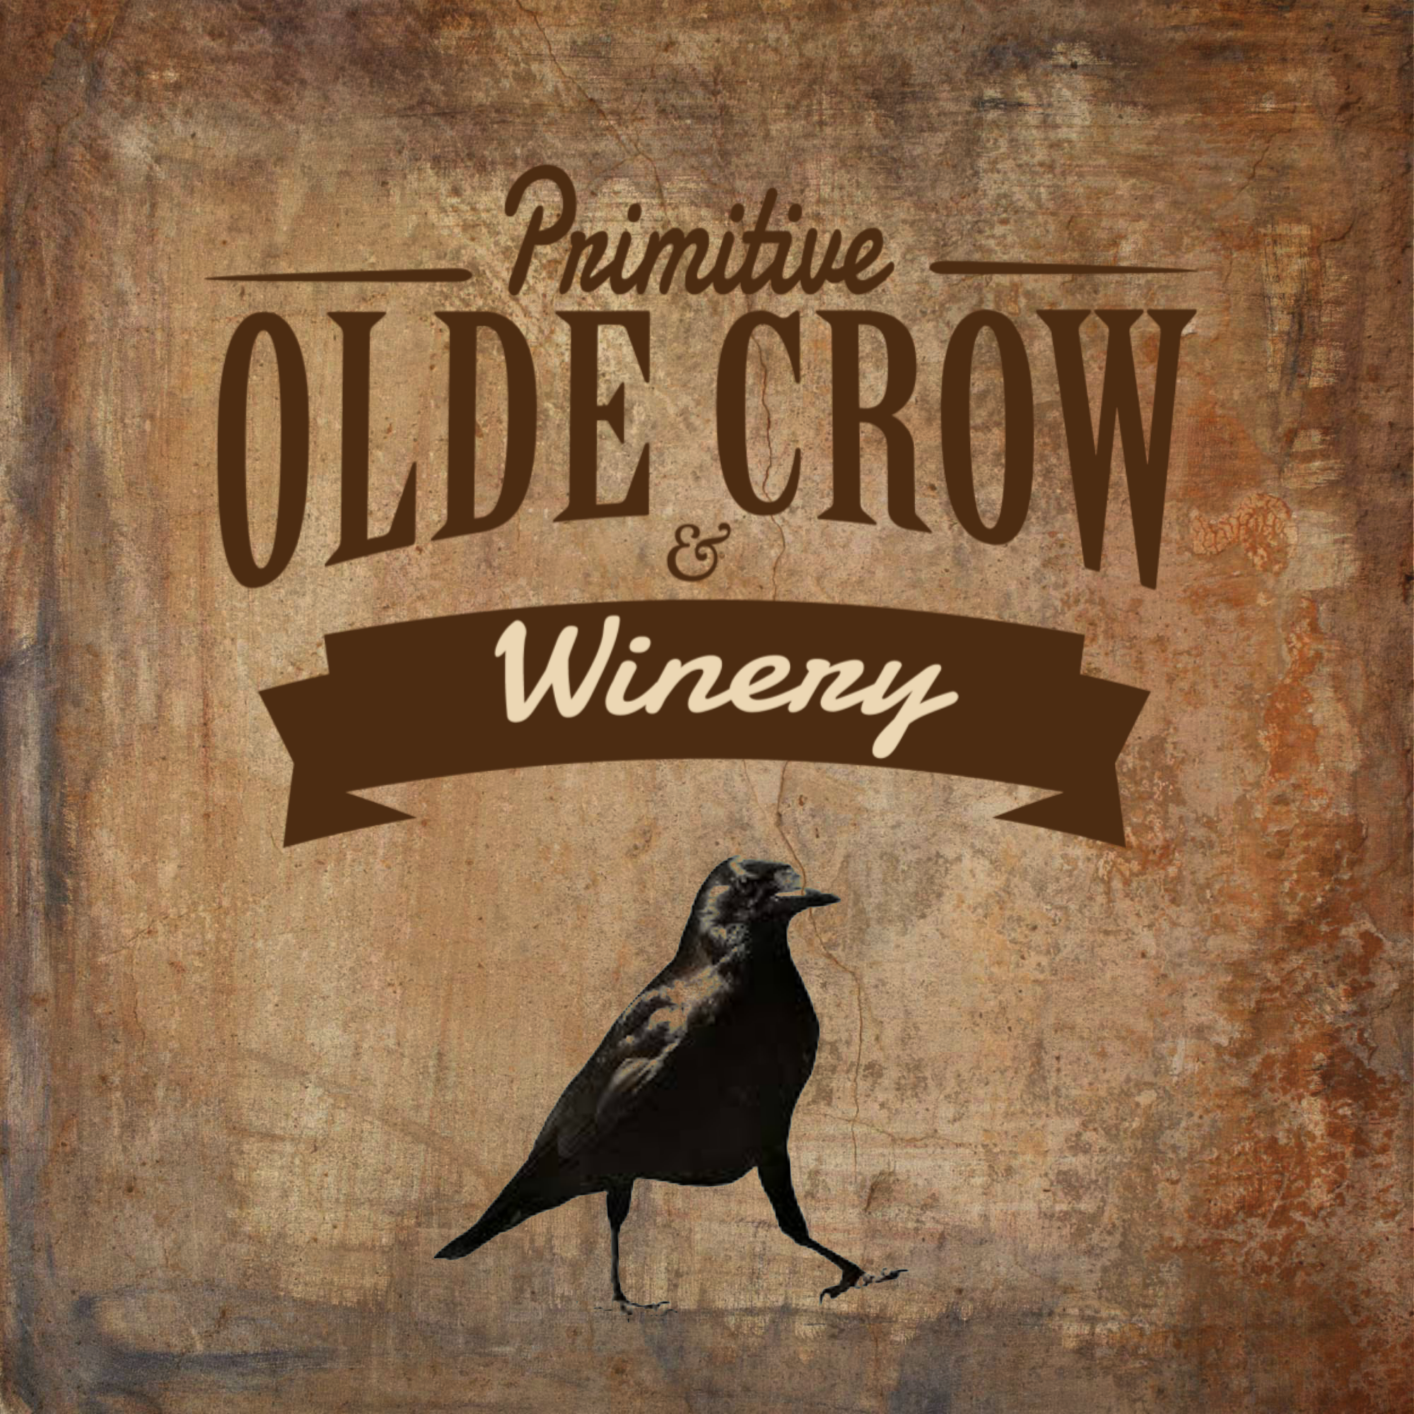 Primitive Olde Crow & Winery - Clinton, MO 64735 - (660)885-2051 | ShowMeLocal.com